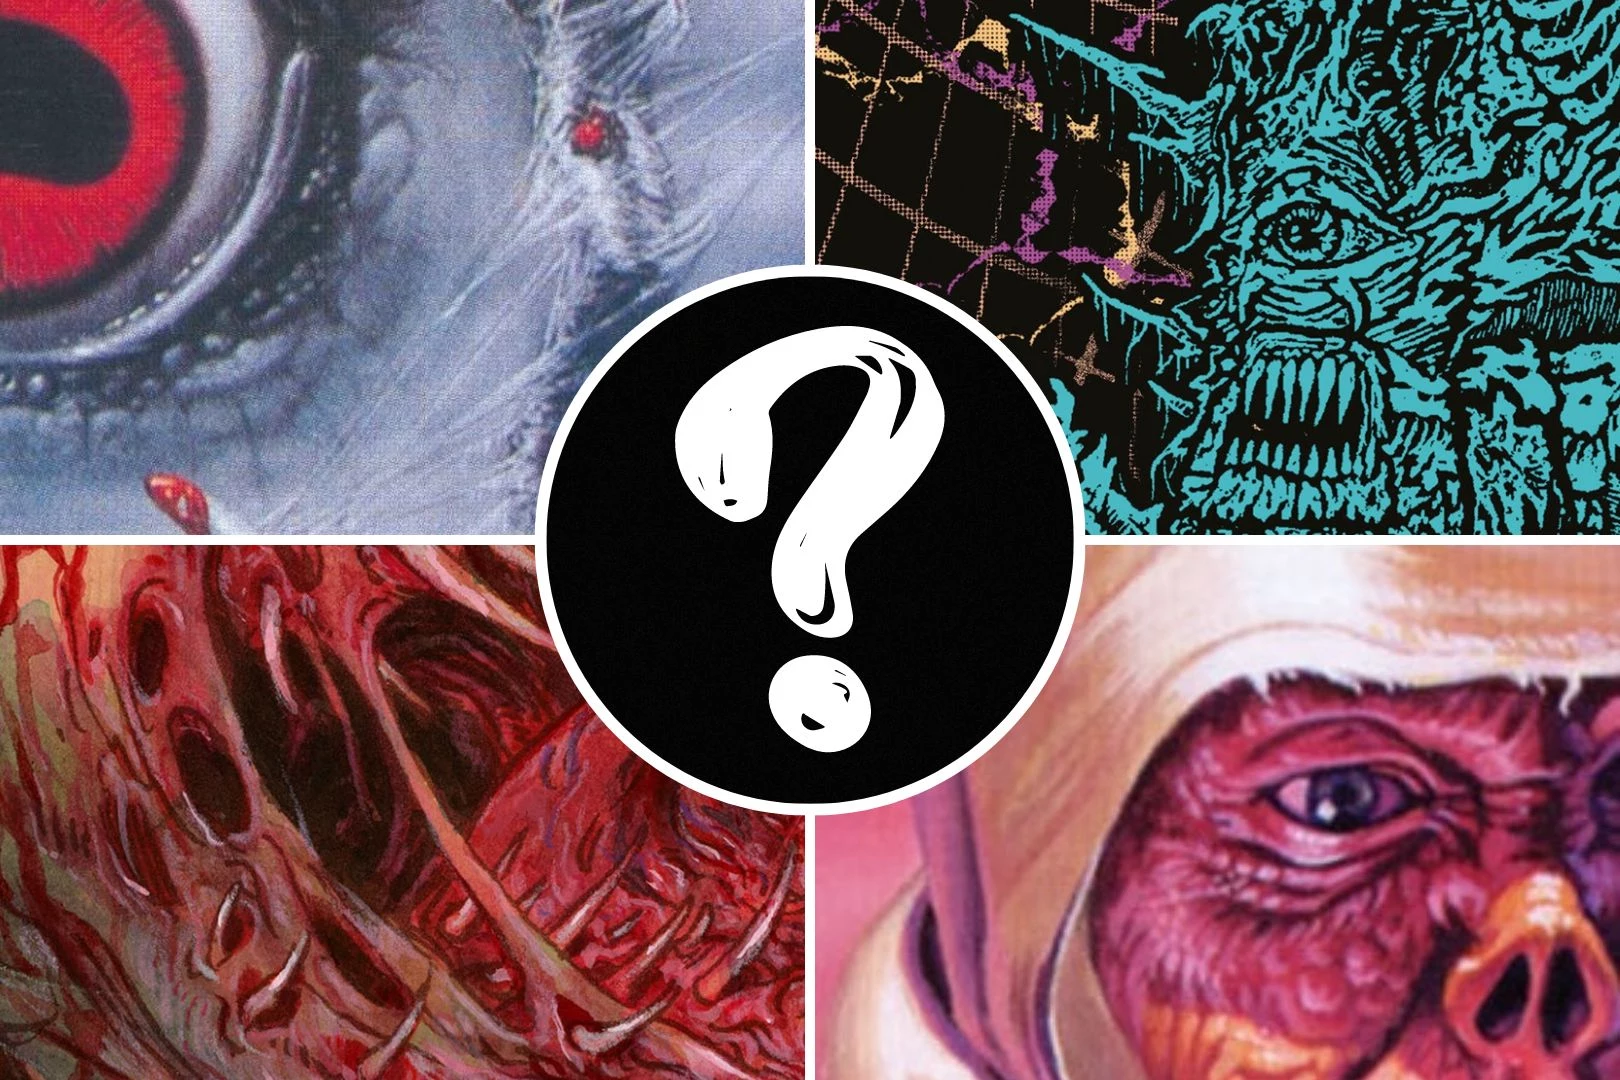 Can You Guess the Death Metal Albums From One Piece of the Cover?